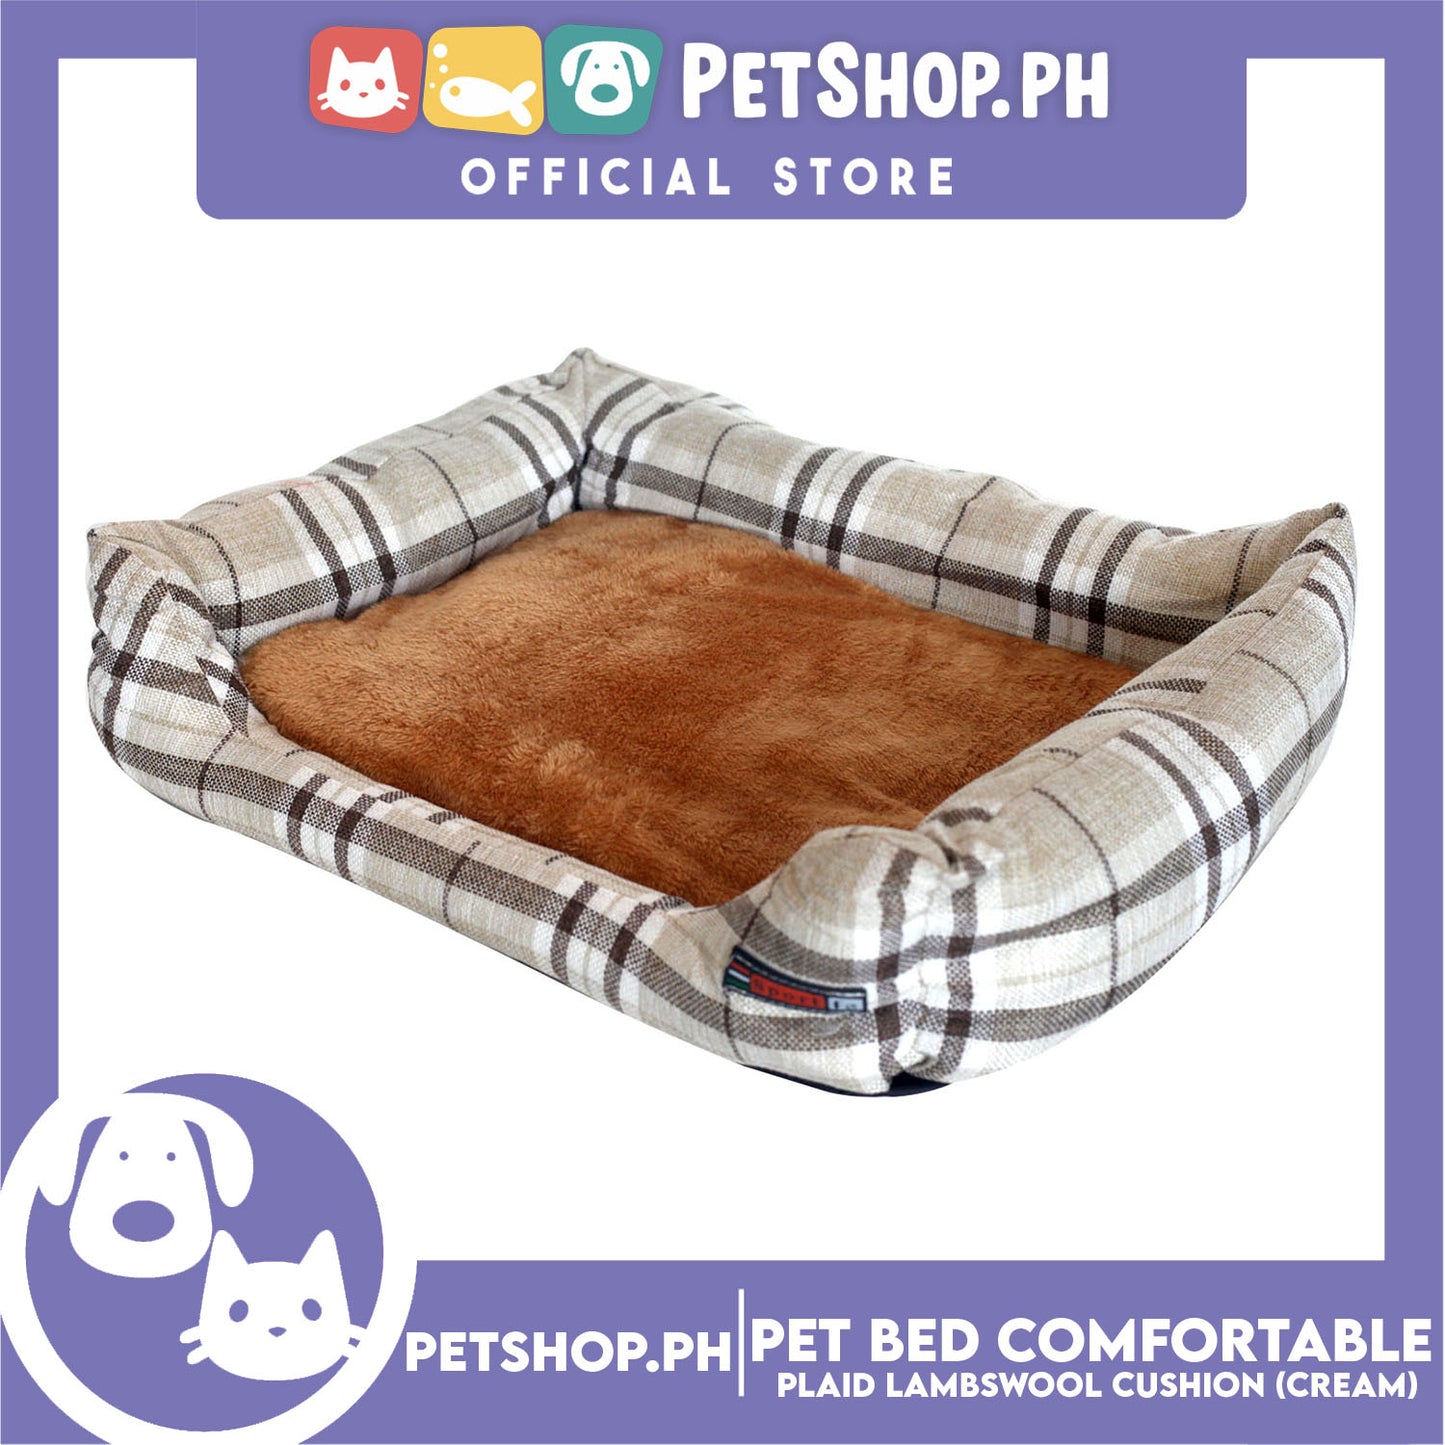 Pet Bed Comfortable Sleeping Bed Plaid Cotton Design with Lambswool Cushion 70x53x11cm Large (Cream)